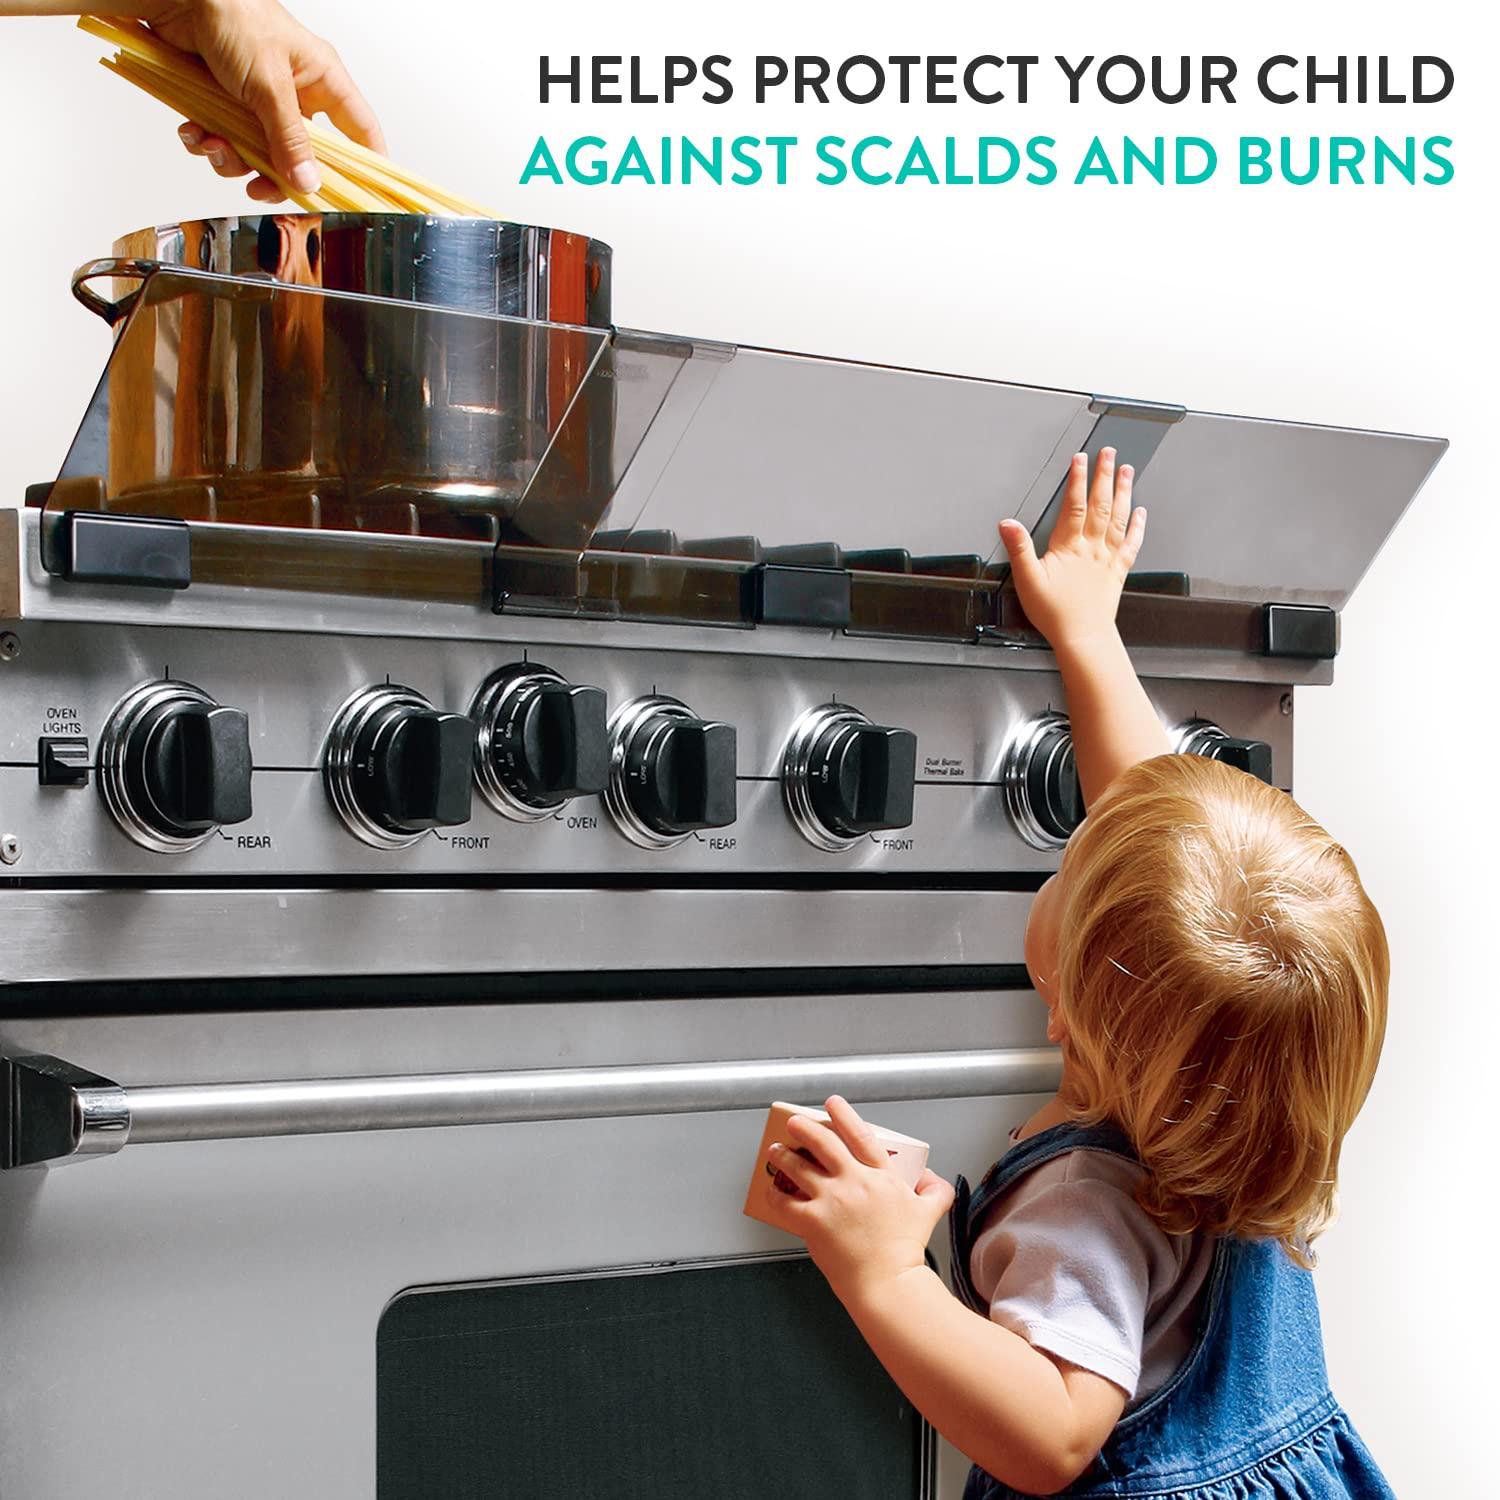 Prince Lionheart Stove Guard for Child Safety Premium Adhesive